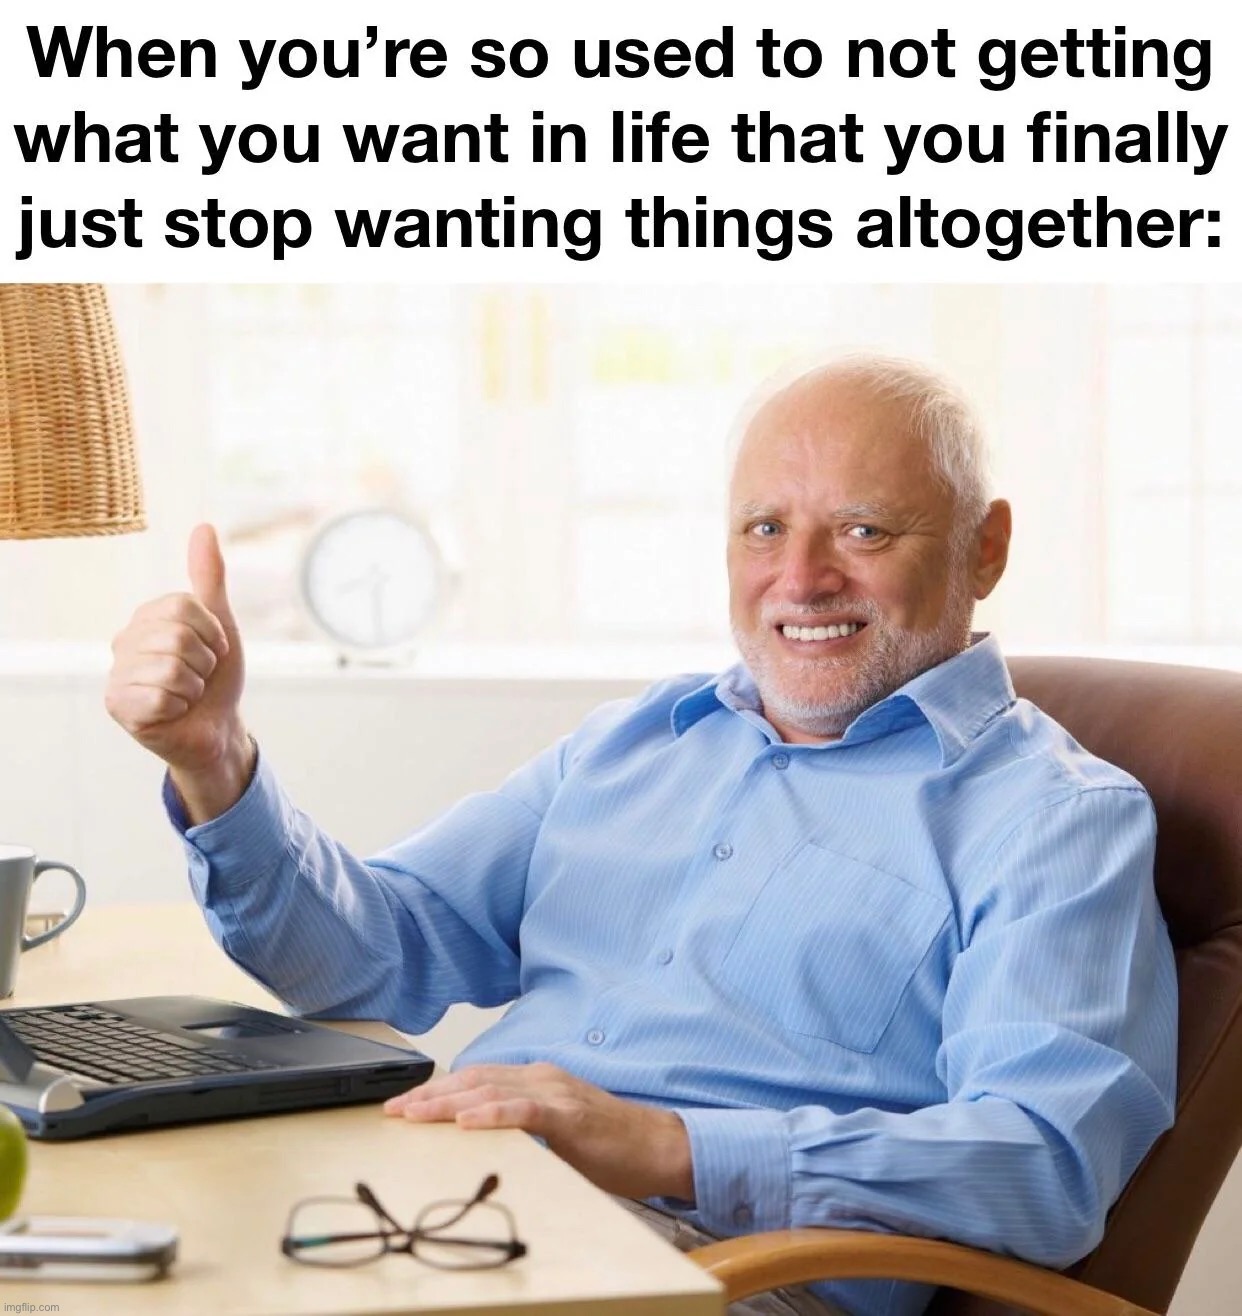 we're reaching levels of relatable that shouldn't even be possible | image tagged in memes,relatable memes,relatable,me irl,hide the pain harold,real | made w/ Imgflip meme maker